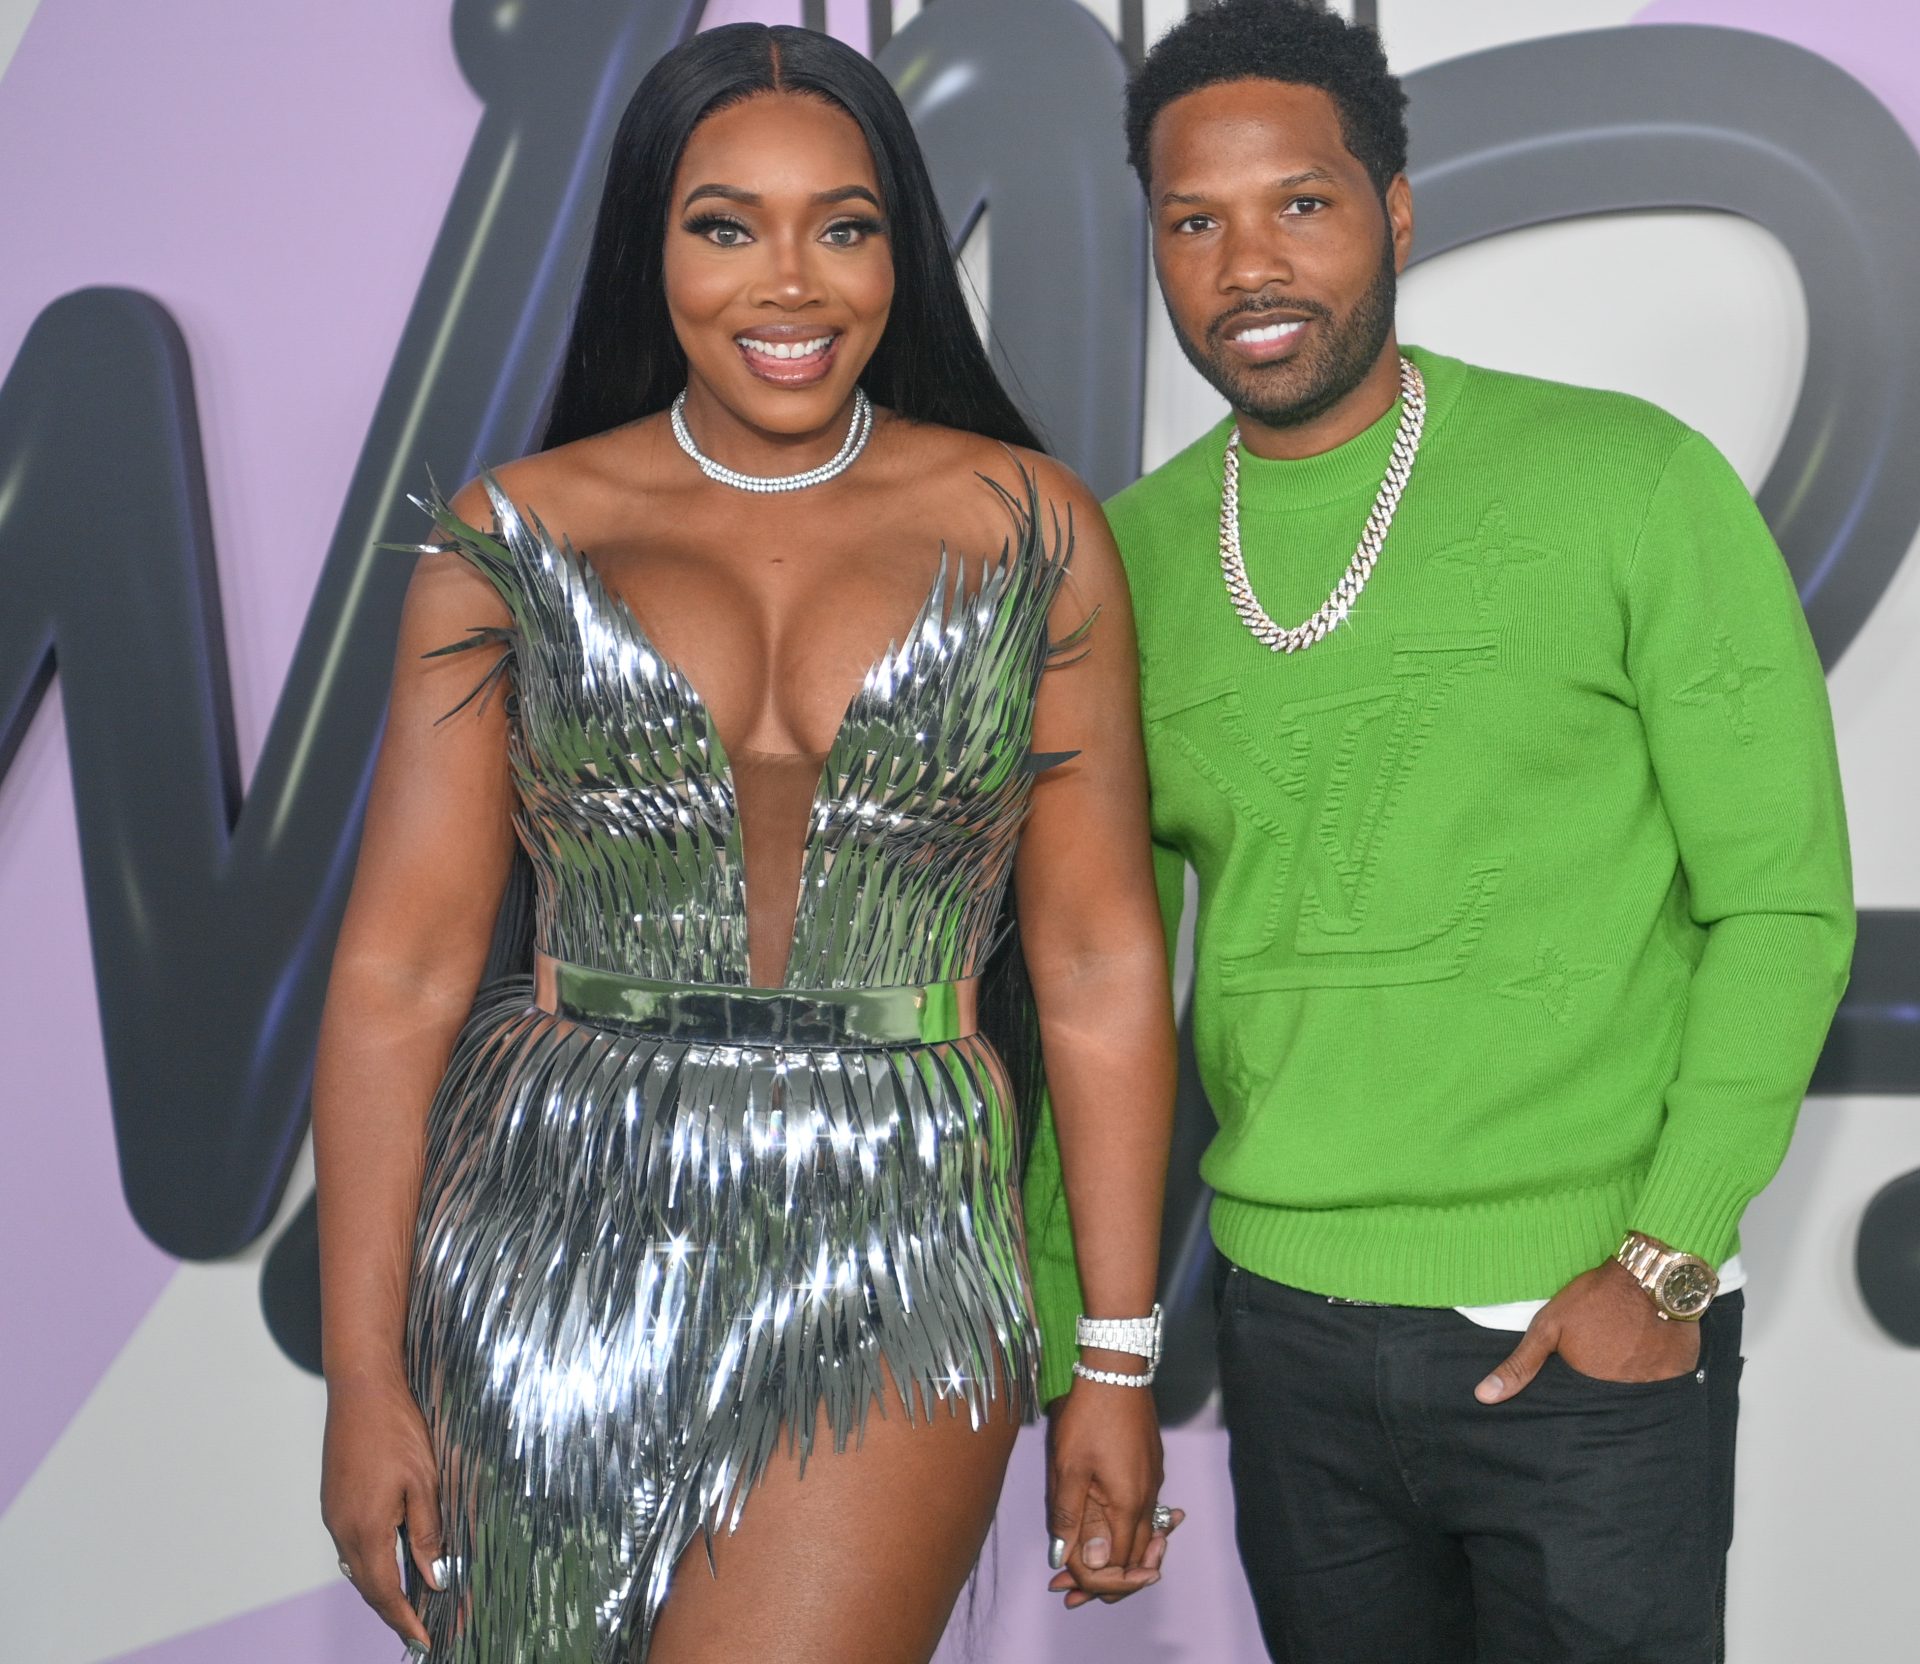 Yandy Smith And Mendeecees’ Love & Marriage Timeline